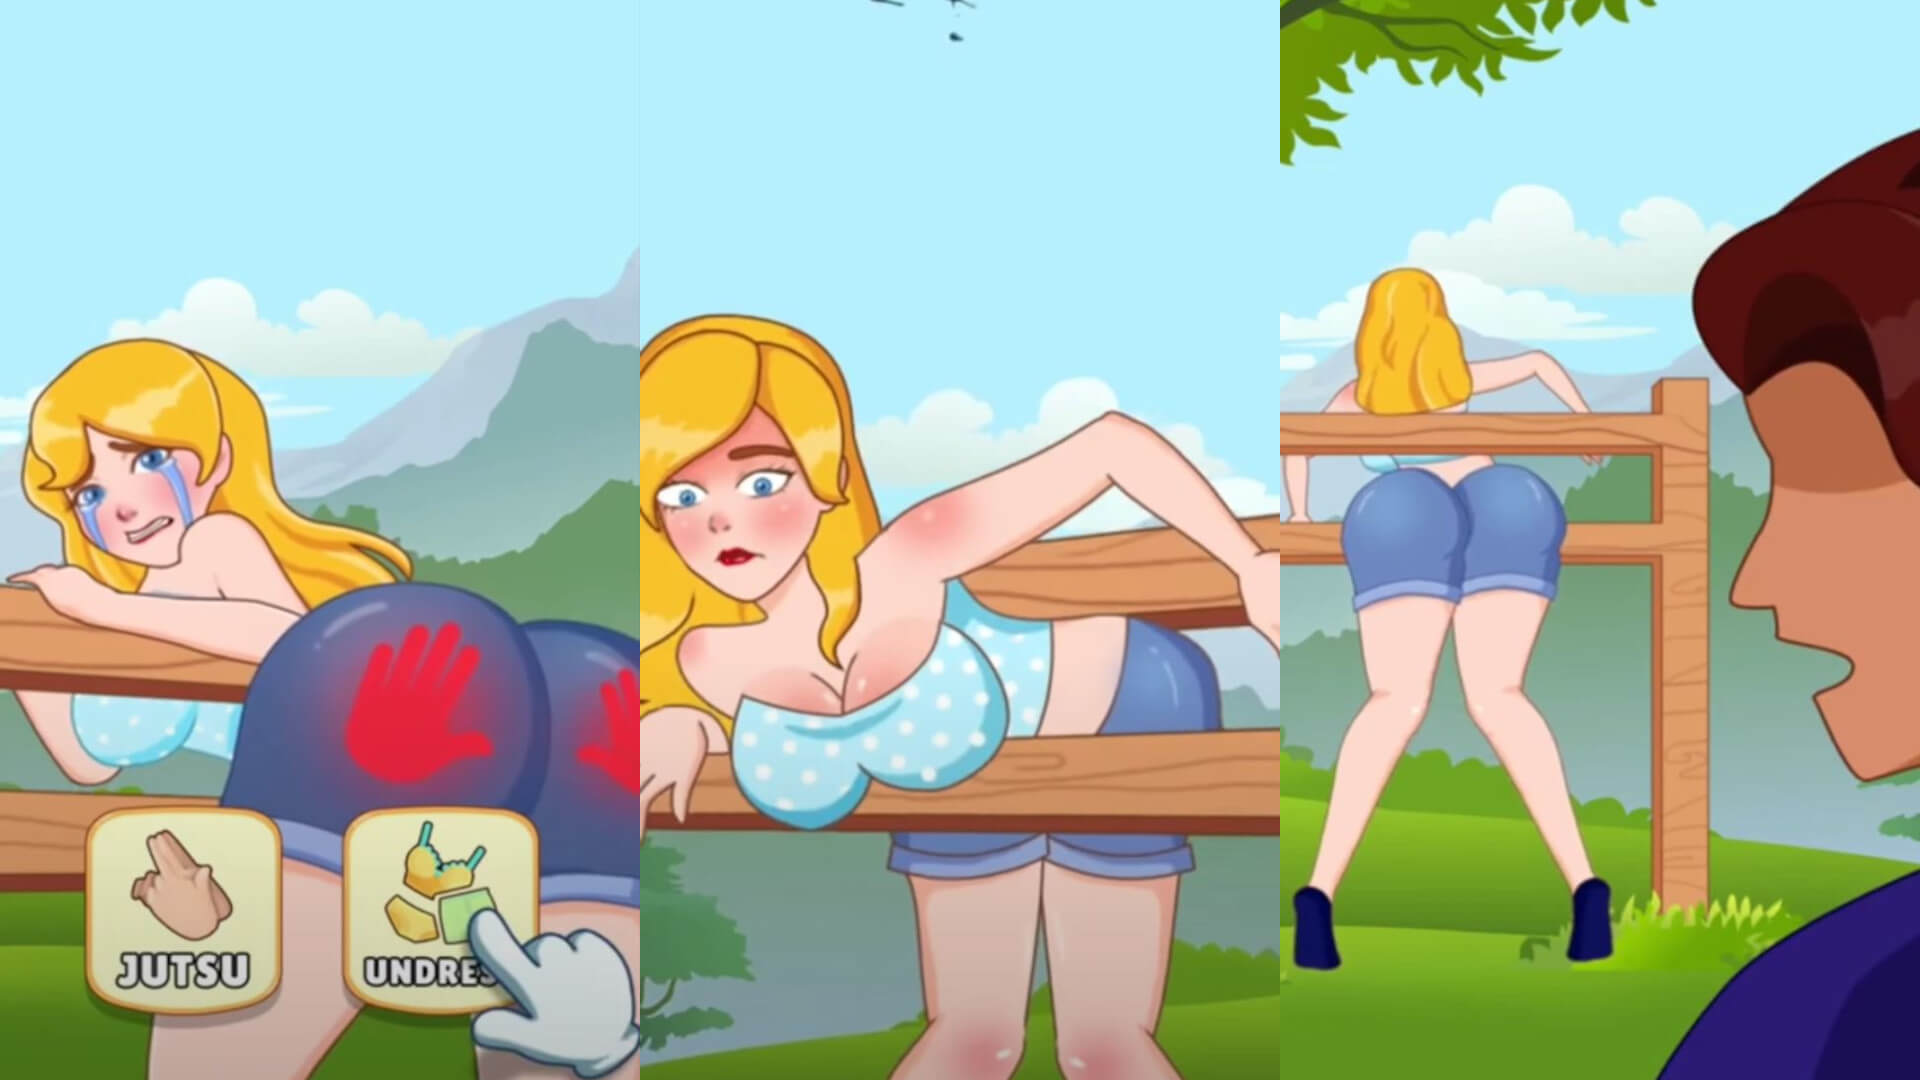 Some stills from the offending Naughty Puzzle ad, which depicts a woman stuck in a fence and which was accused by the ASA of condoning "sexual assault"